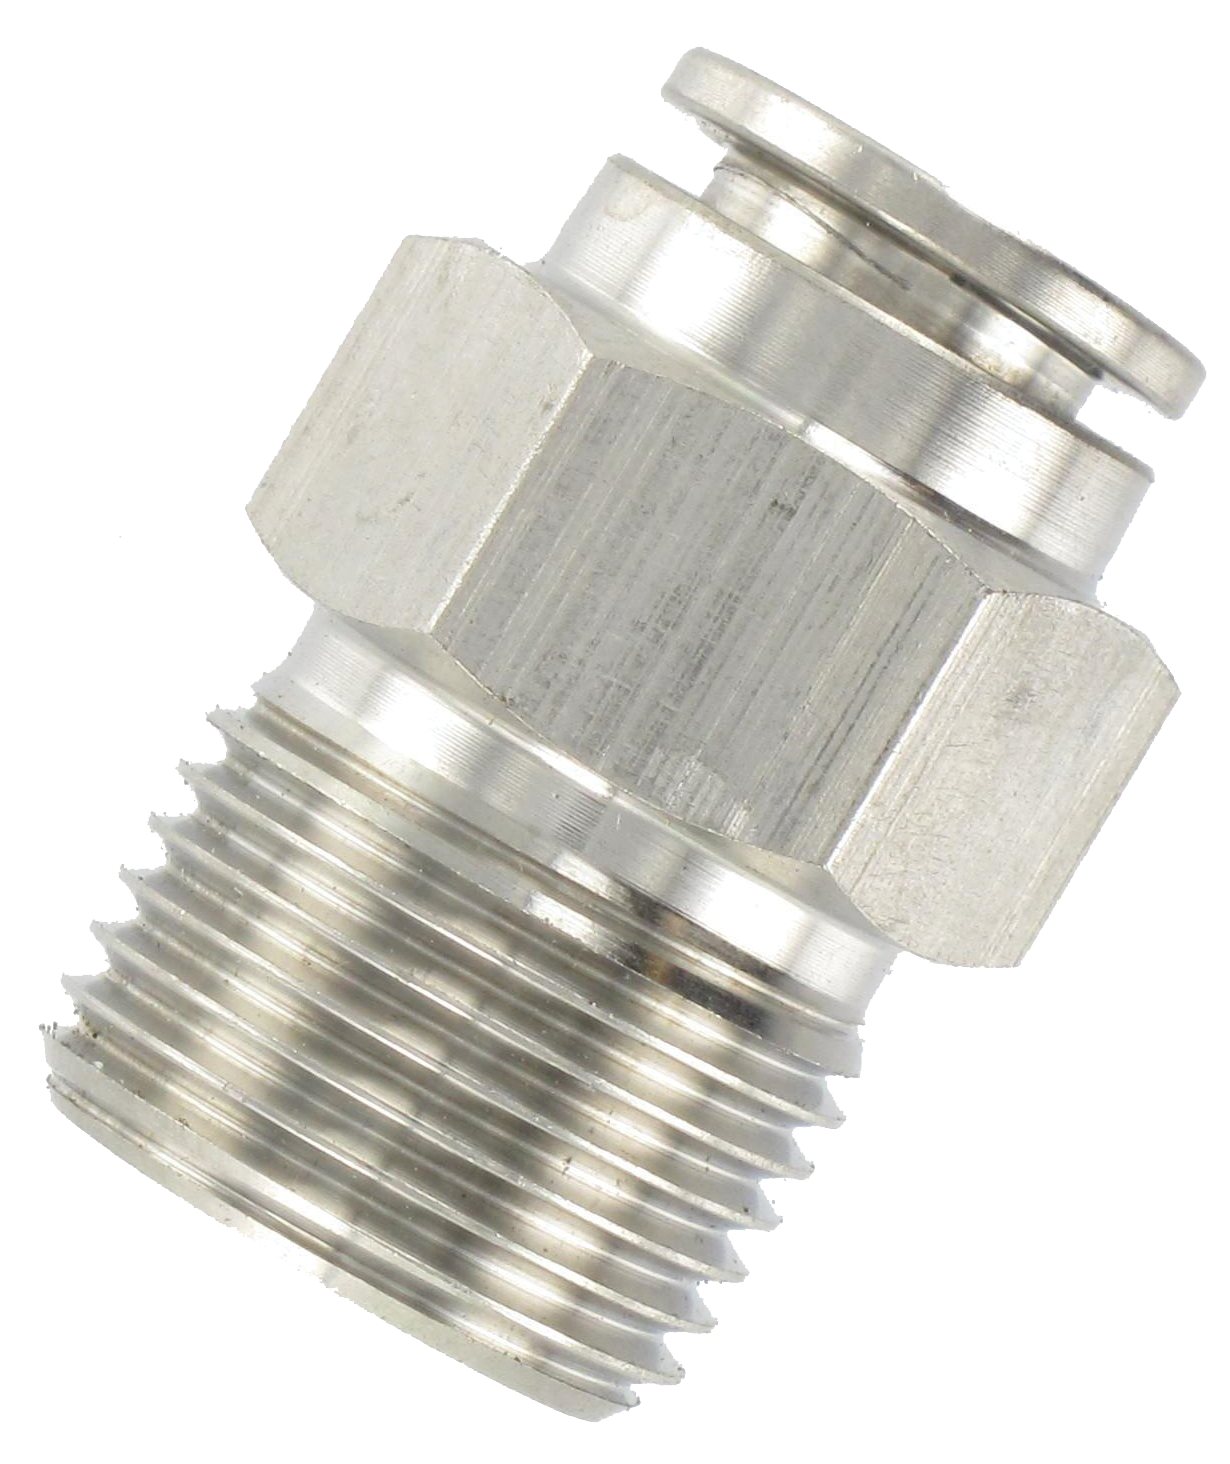 Push-in standard fittings in stainless steel